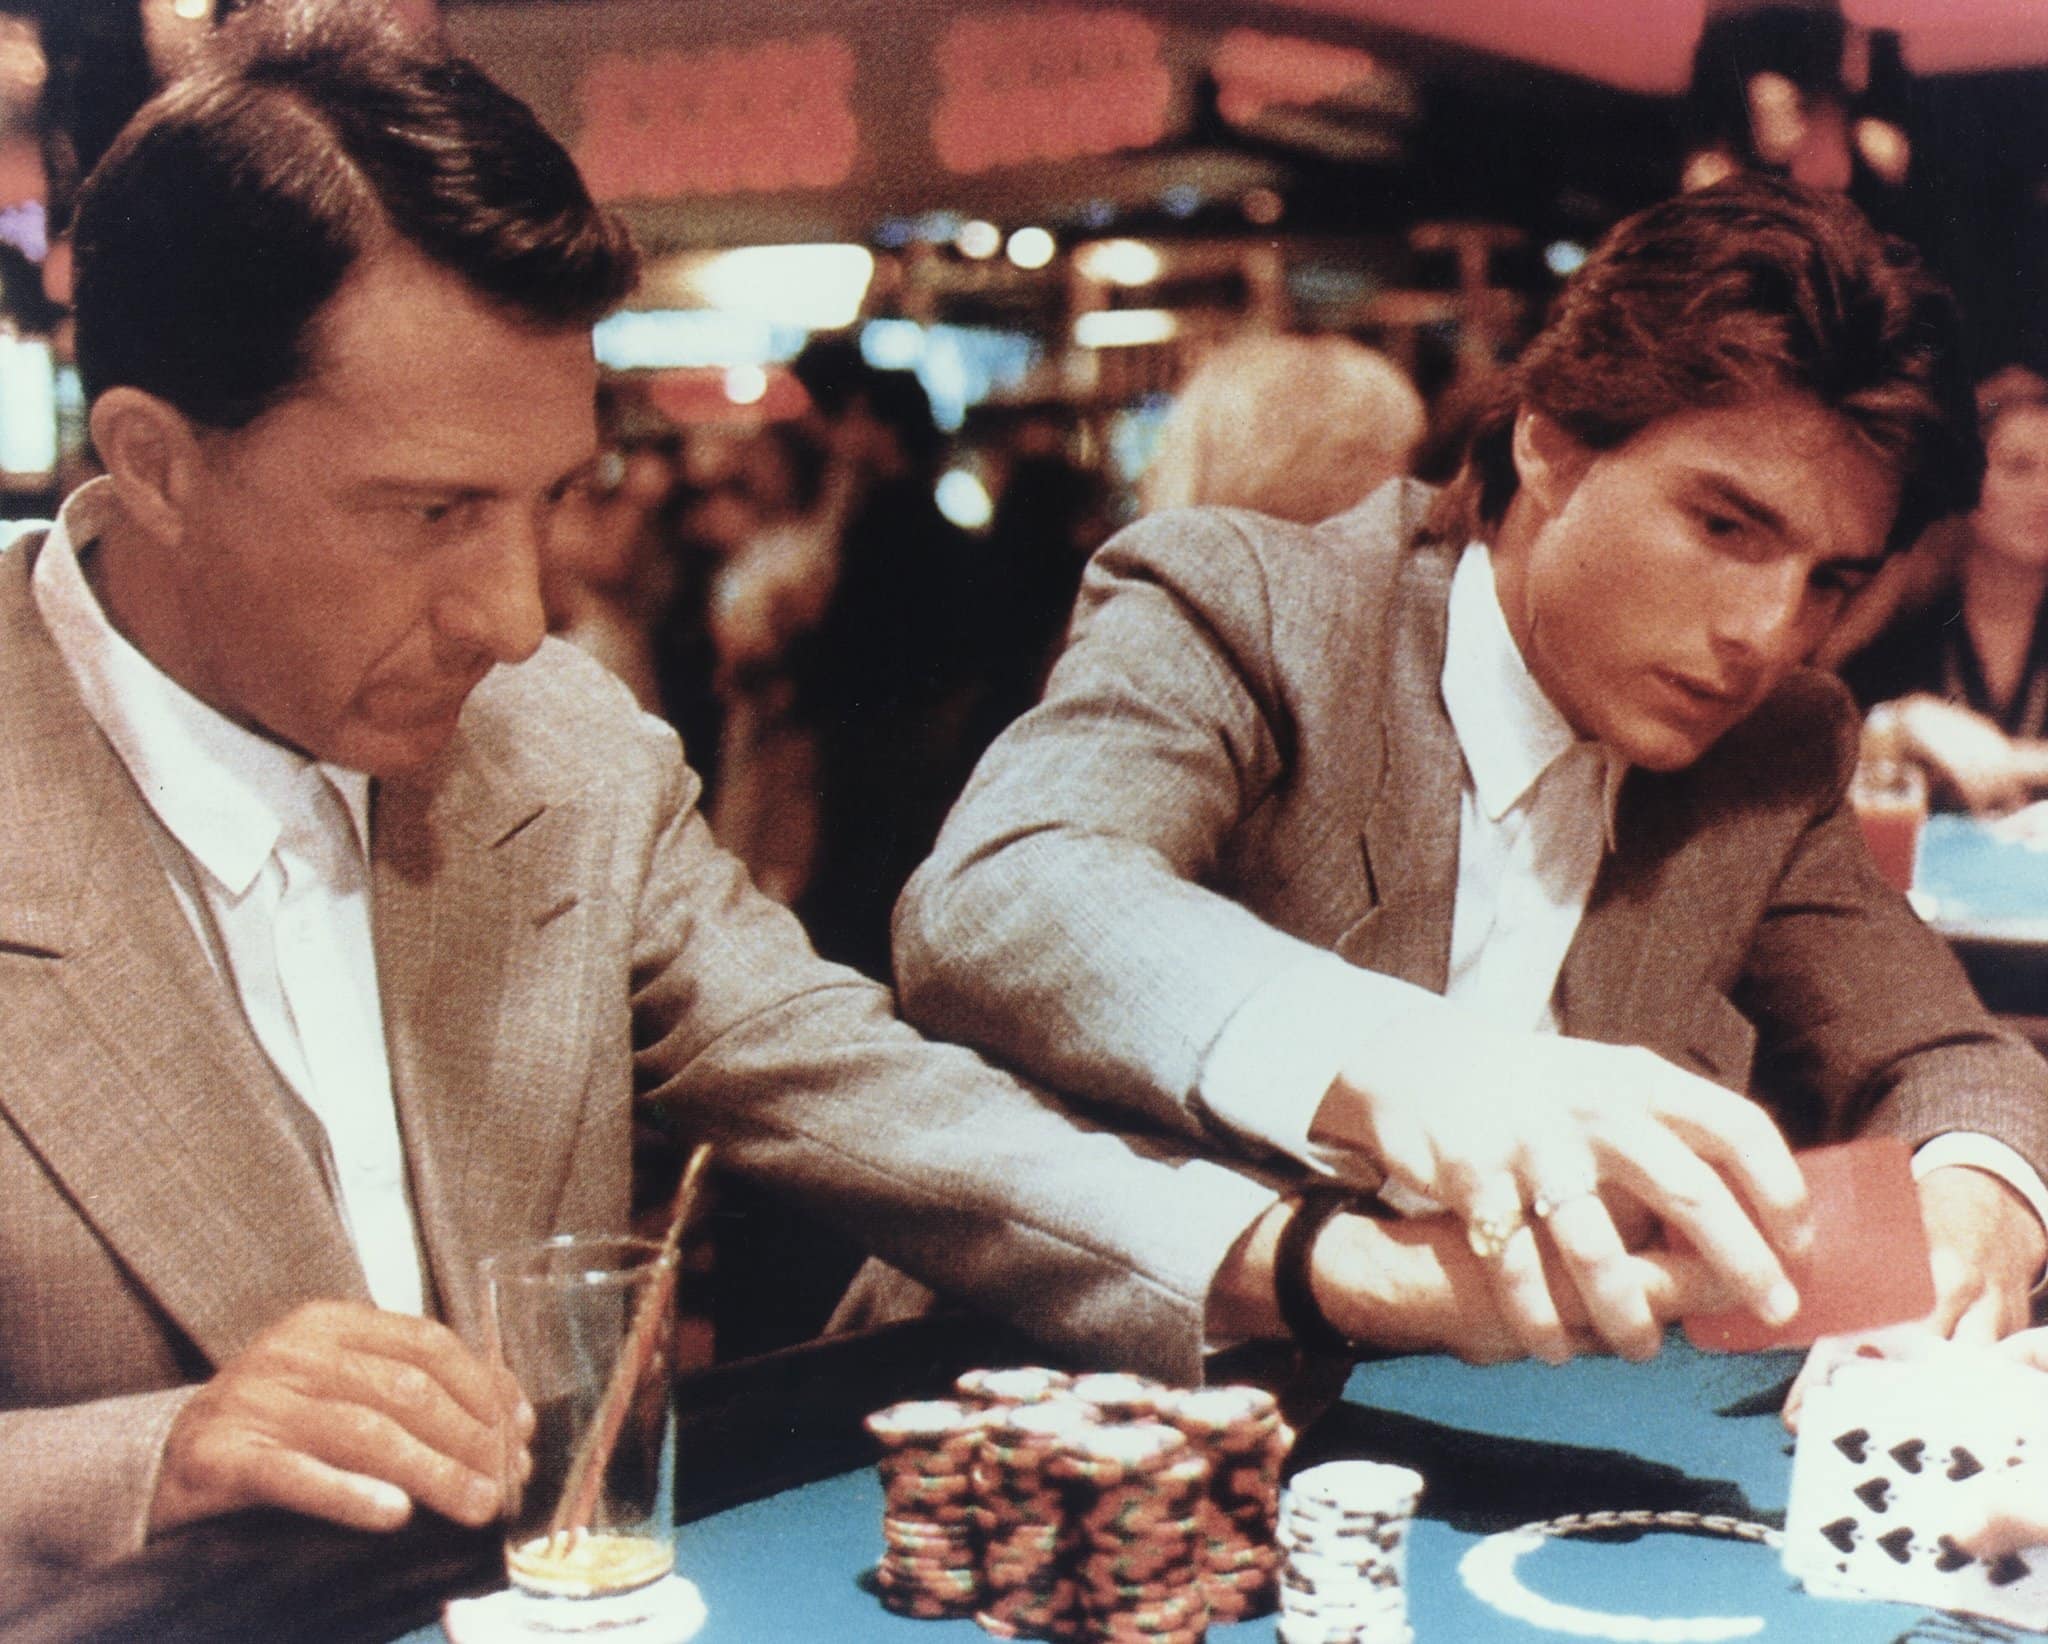 Rain Man took home the 1988 Academy Award for Best Picture, Best Director, Best Actor for Dustin Hoffman, and Best Screenplay